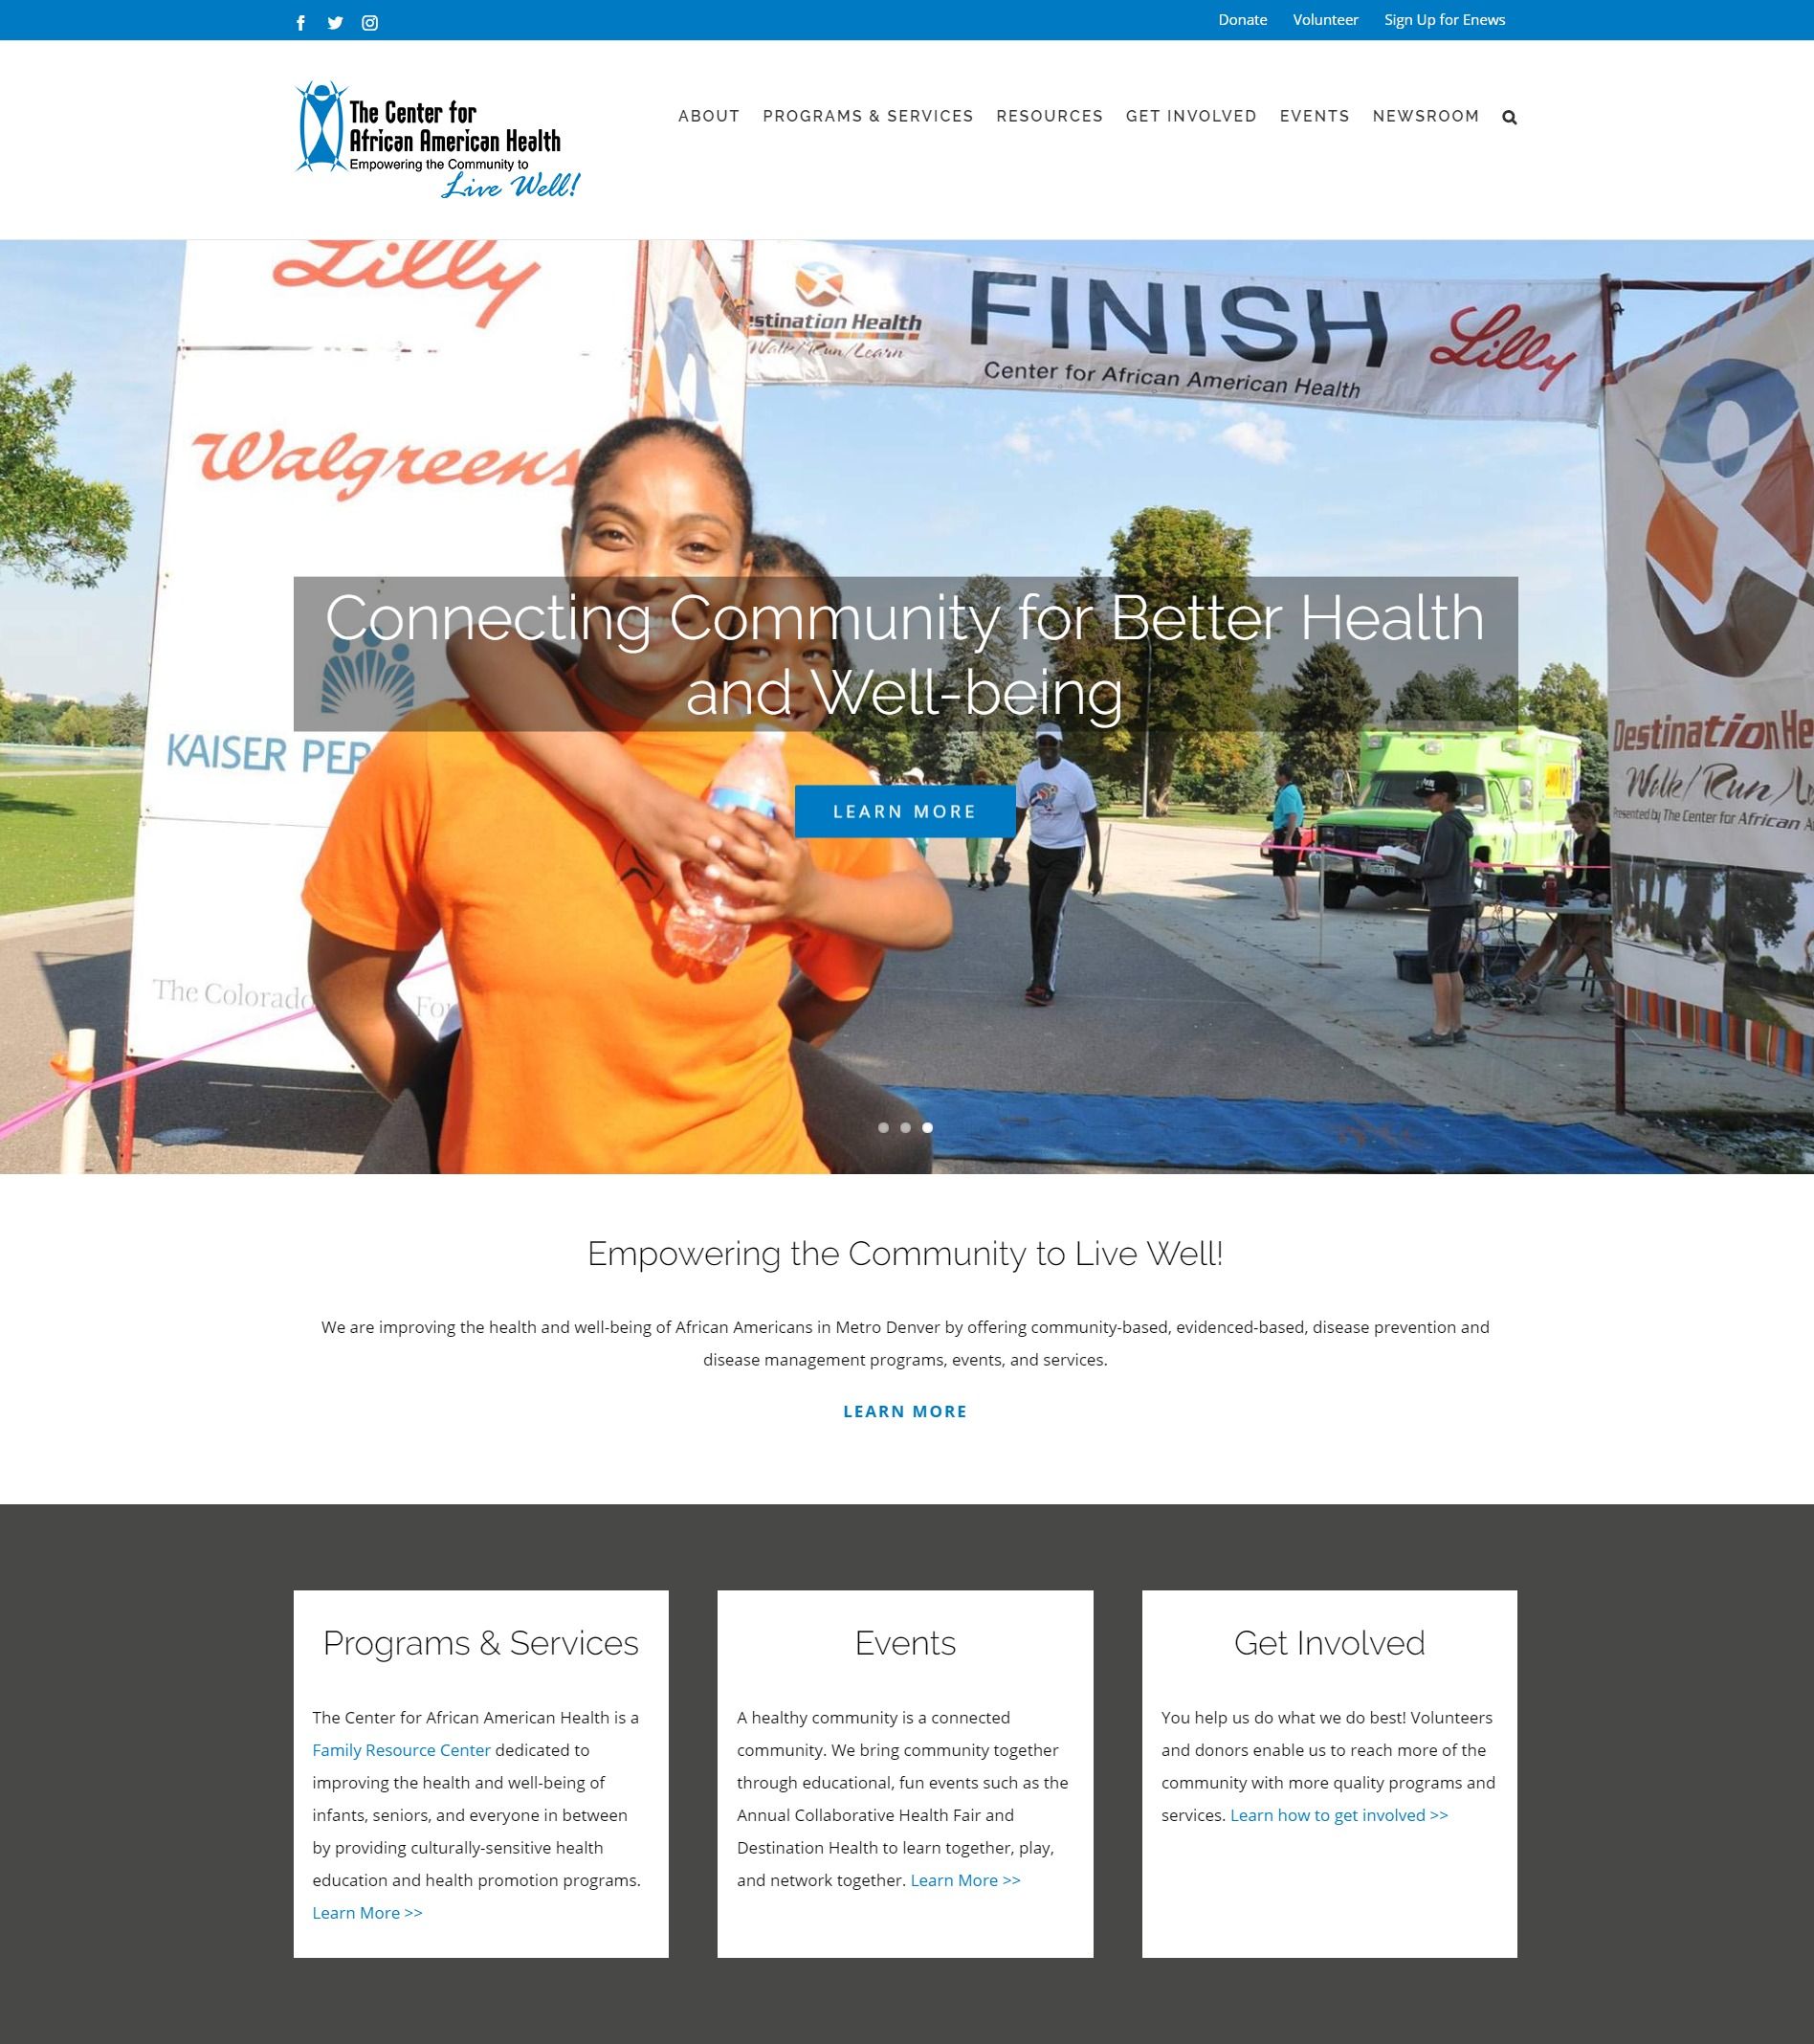 The Center for African American Health Homepage